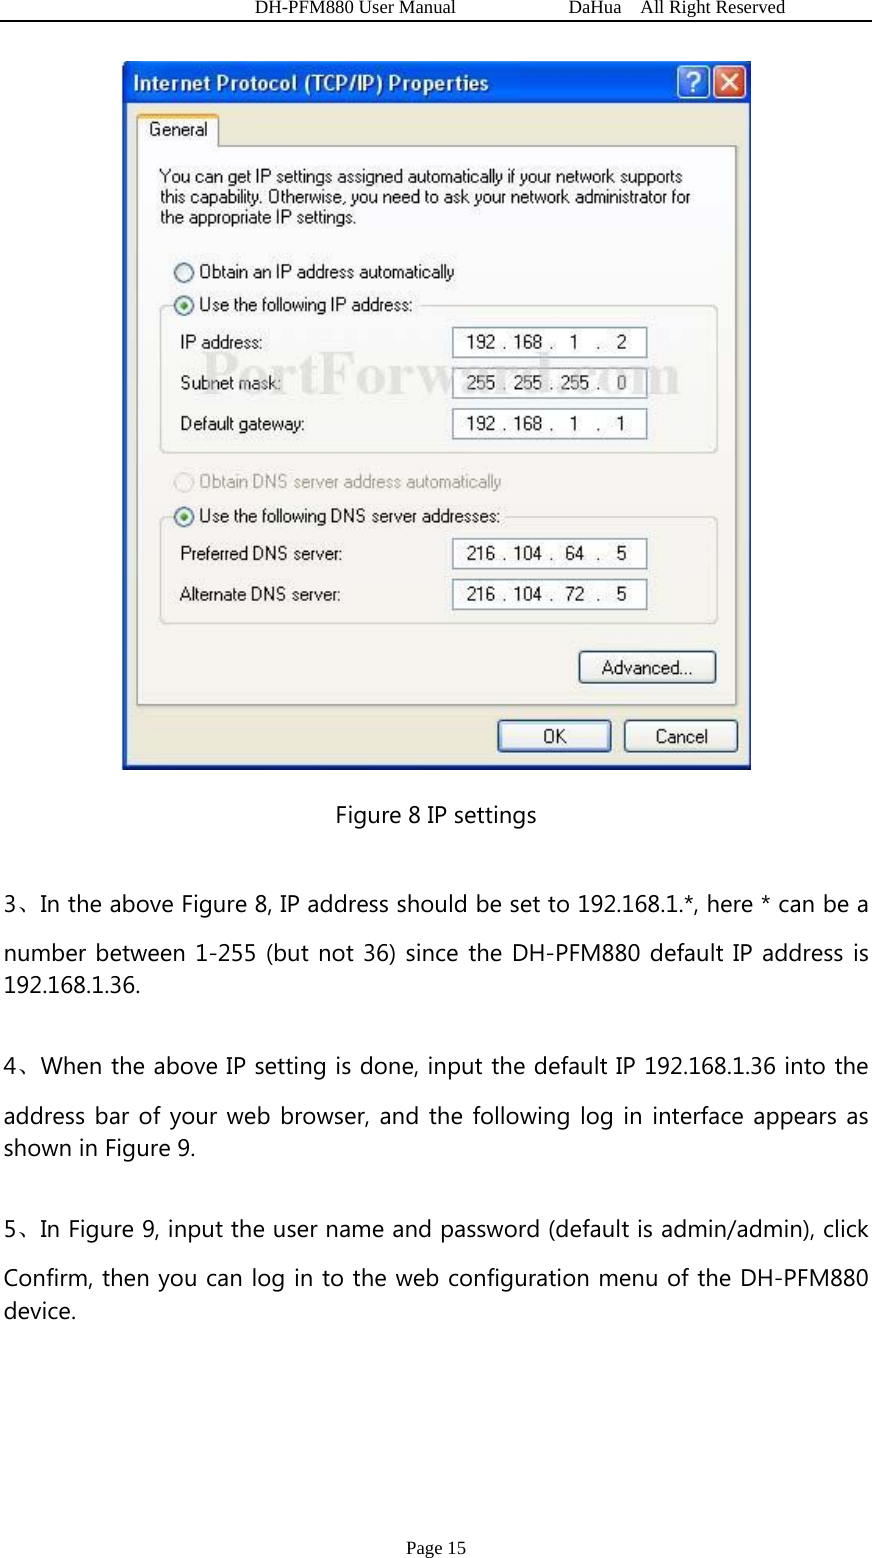   DH-PFM880 User Manual            DaHua  All Right Reserved Page 15  Figure 8 IP settings 3、In the above Figure 8, IP address should be set to 192.168.1.*, here * can be a number between 1-255 (but not 36) since the DH-PFM880 default IP address is 192.168.1.36. 4、When the above IP setting is done, input the default IP 192.168.1.36 into the address bar of your web browser, and the following log in interface appears as shown in Figure 9. 5、In Figure 9, input the user name and password (default is admin/admin), click Confirm, then you can log in to the web configuration menu of the DH-PFM880 device. 